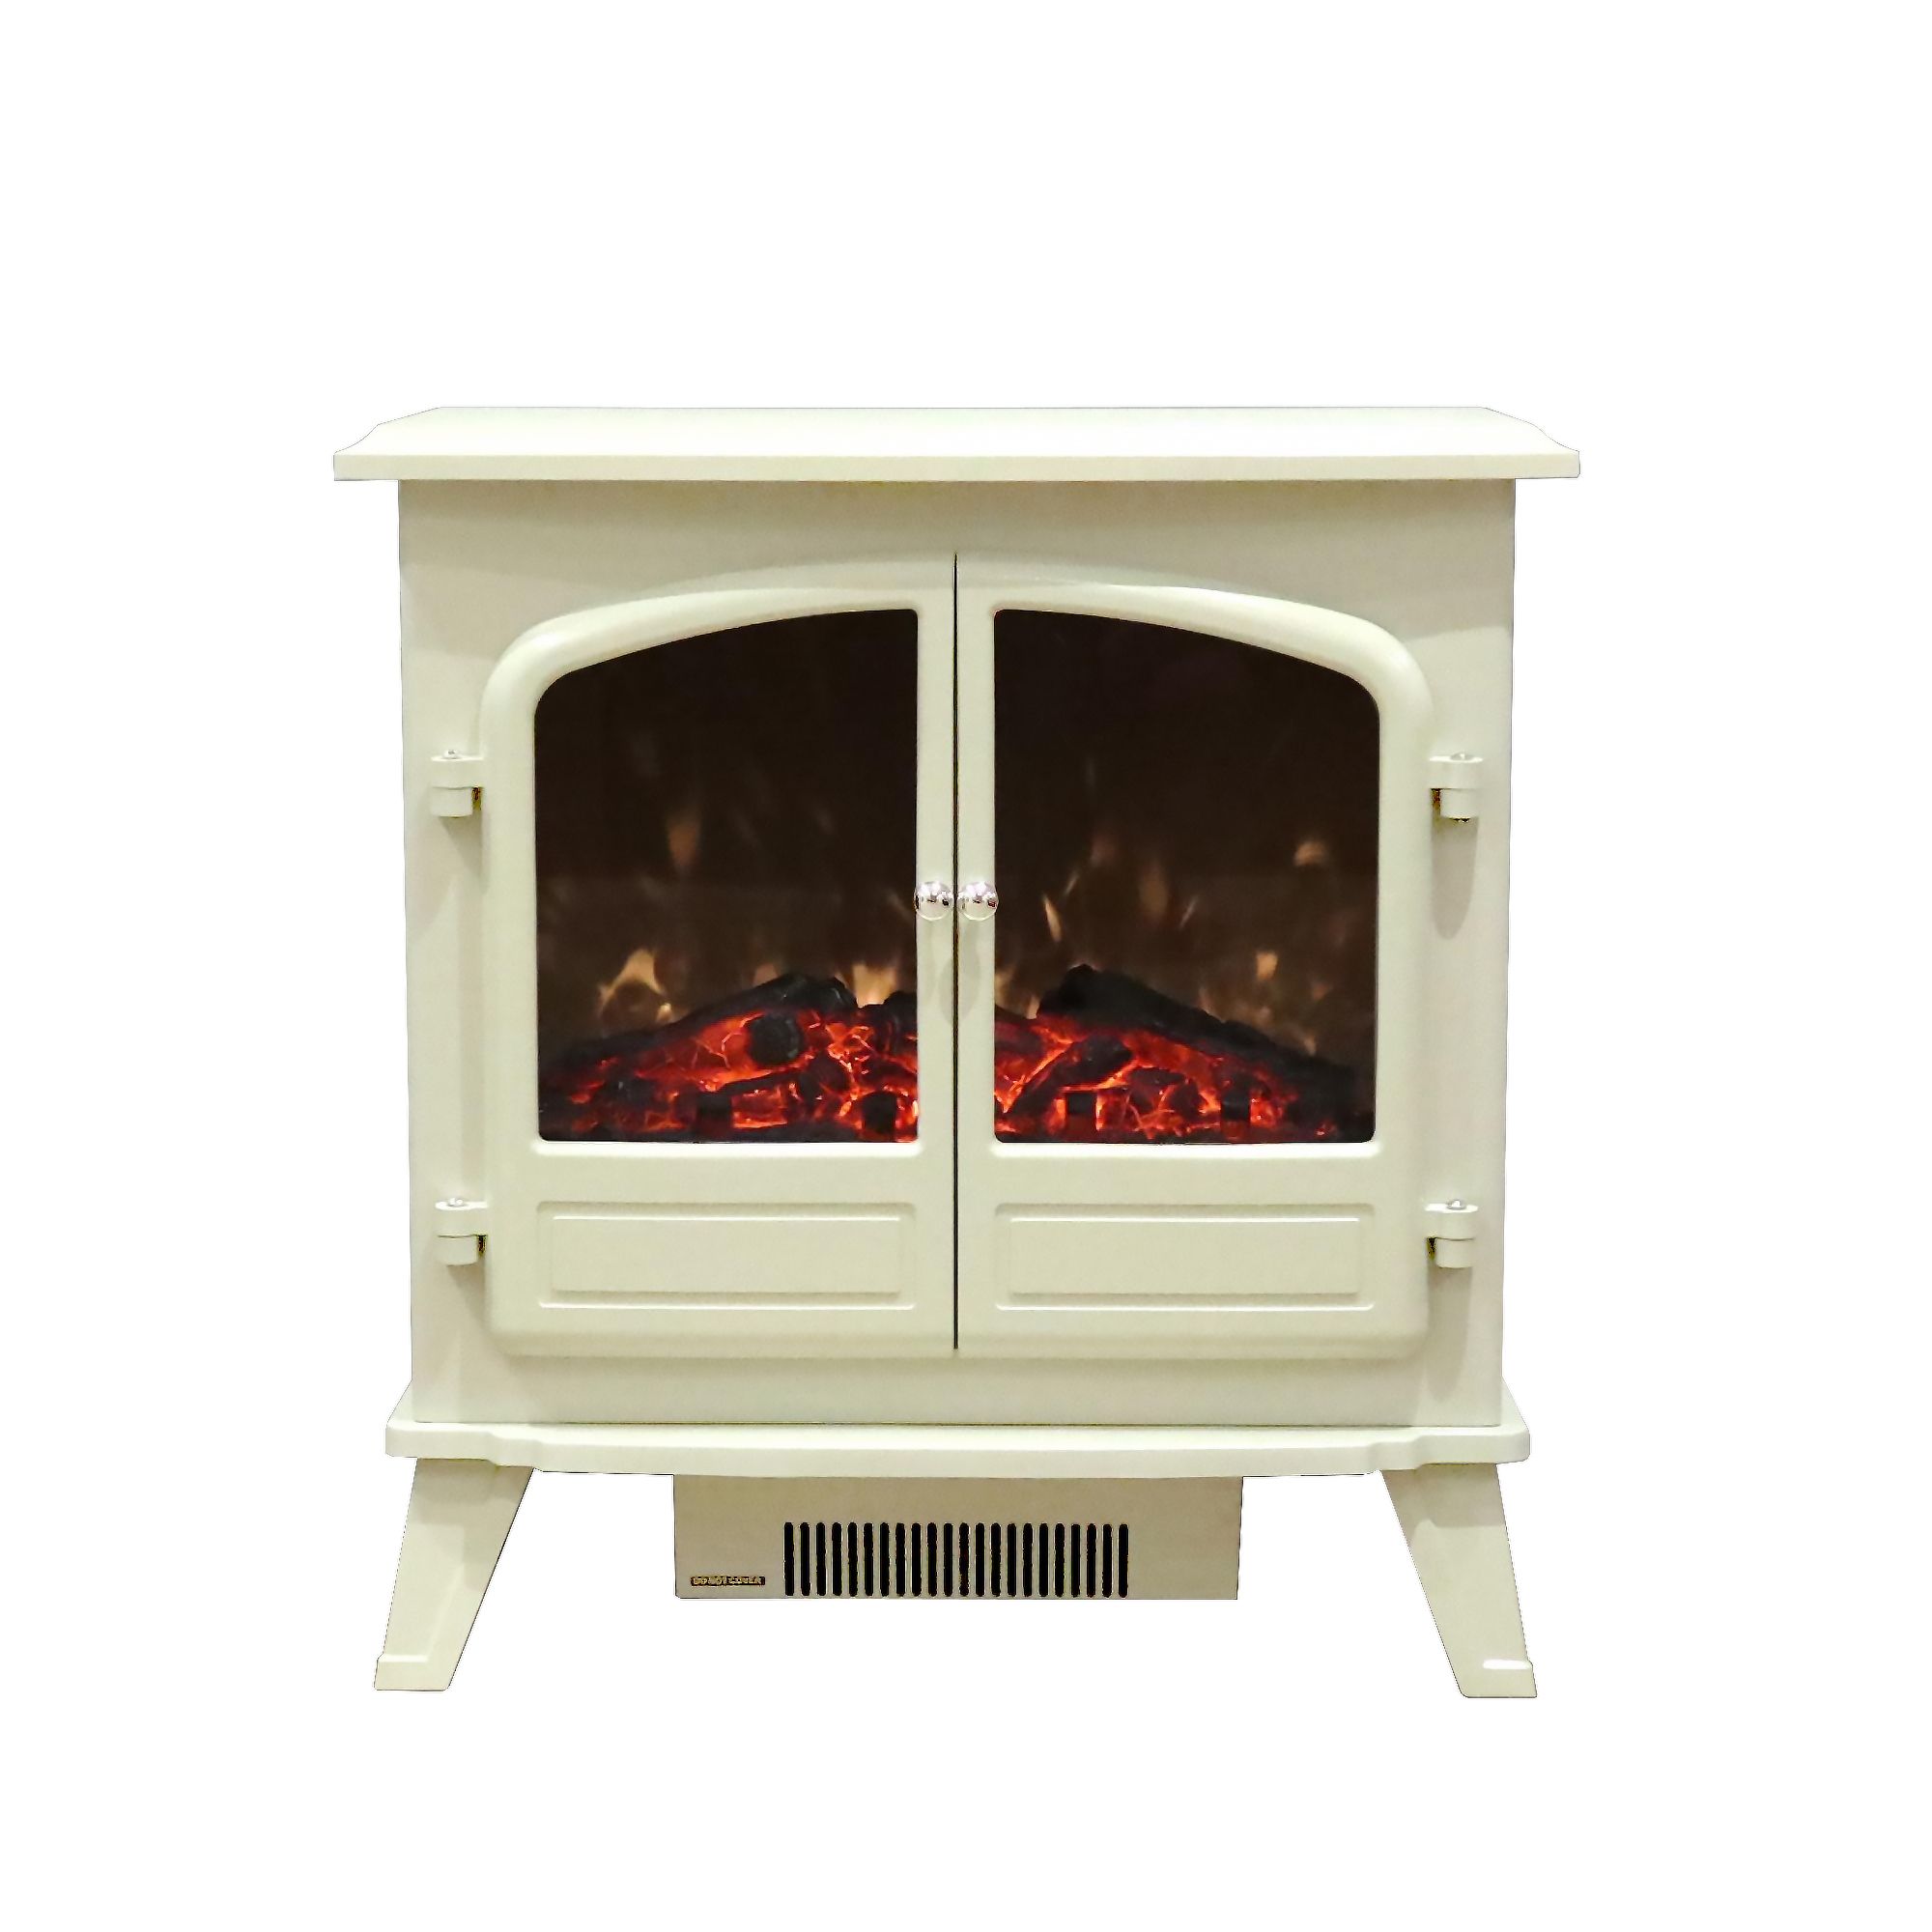 Focal Point Weybourne Traditional 1850W Matt Cream Electric Stove